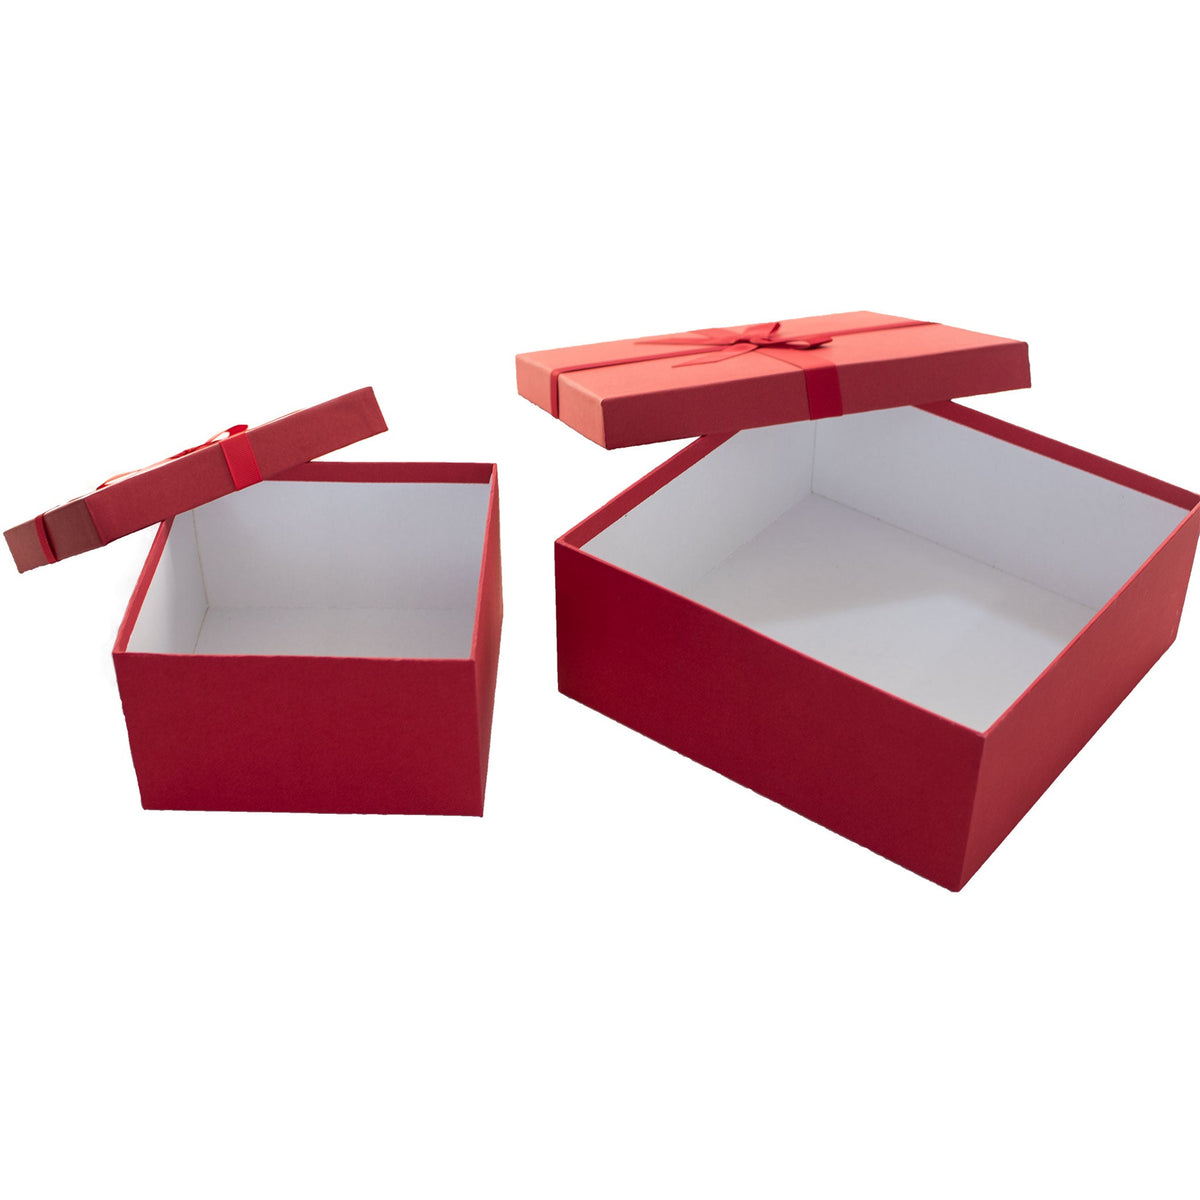 Red Christmas Gift Boxes